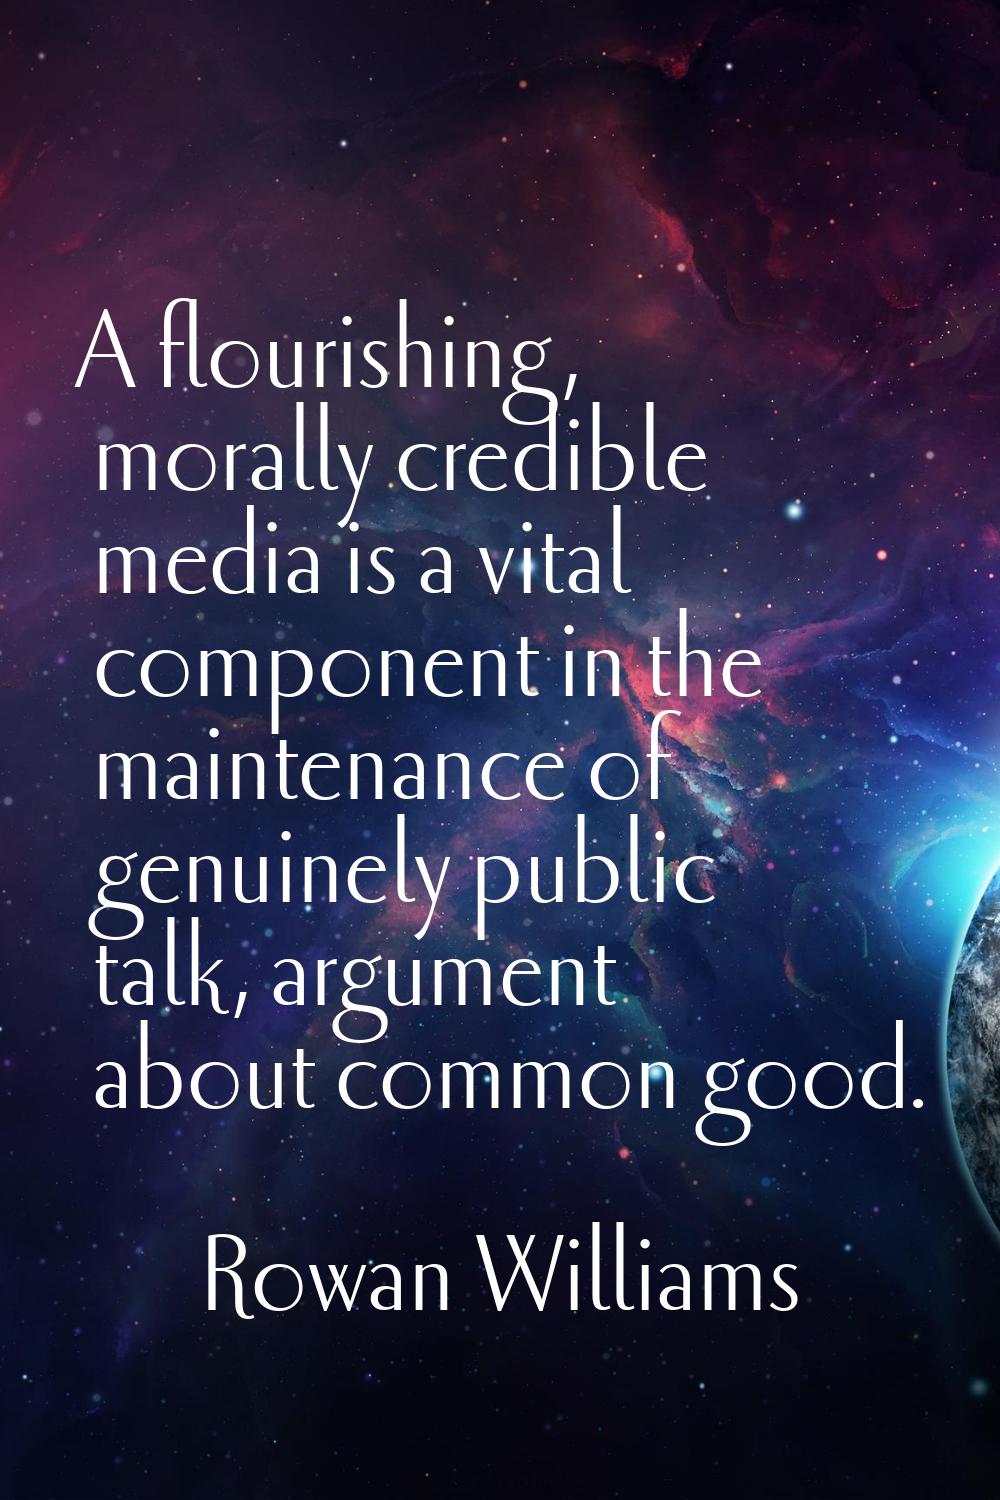 A flourishing, morally credible media is a vital component in the maintenance of genuinely public t